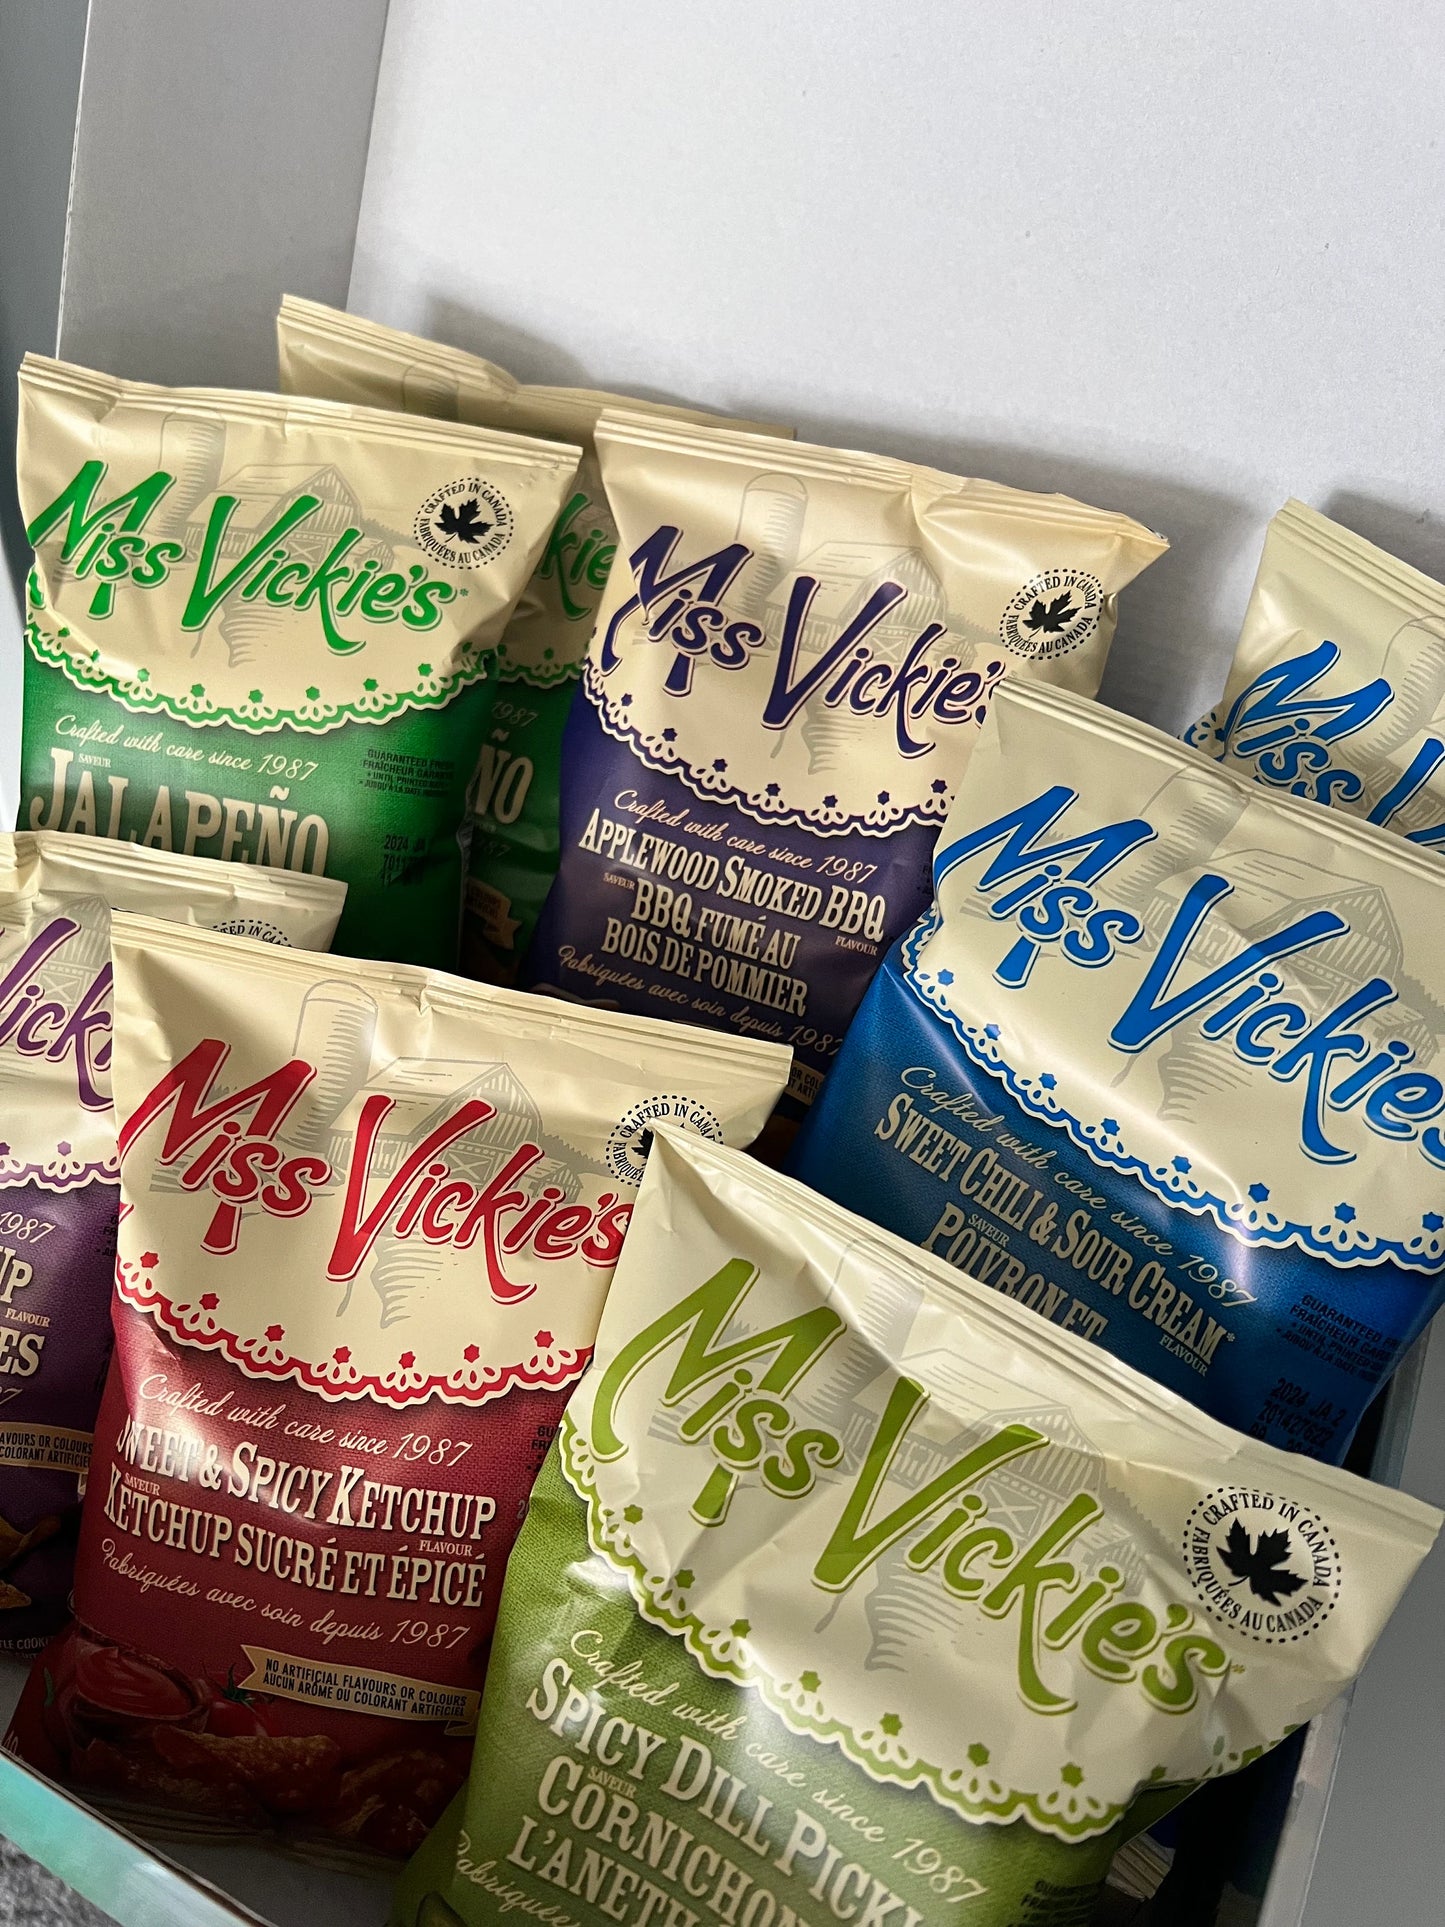 8-PACK Variety Miss Vickies Chips Gift Box Canadian Chips